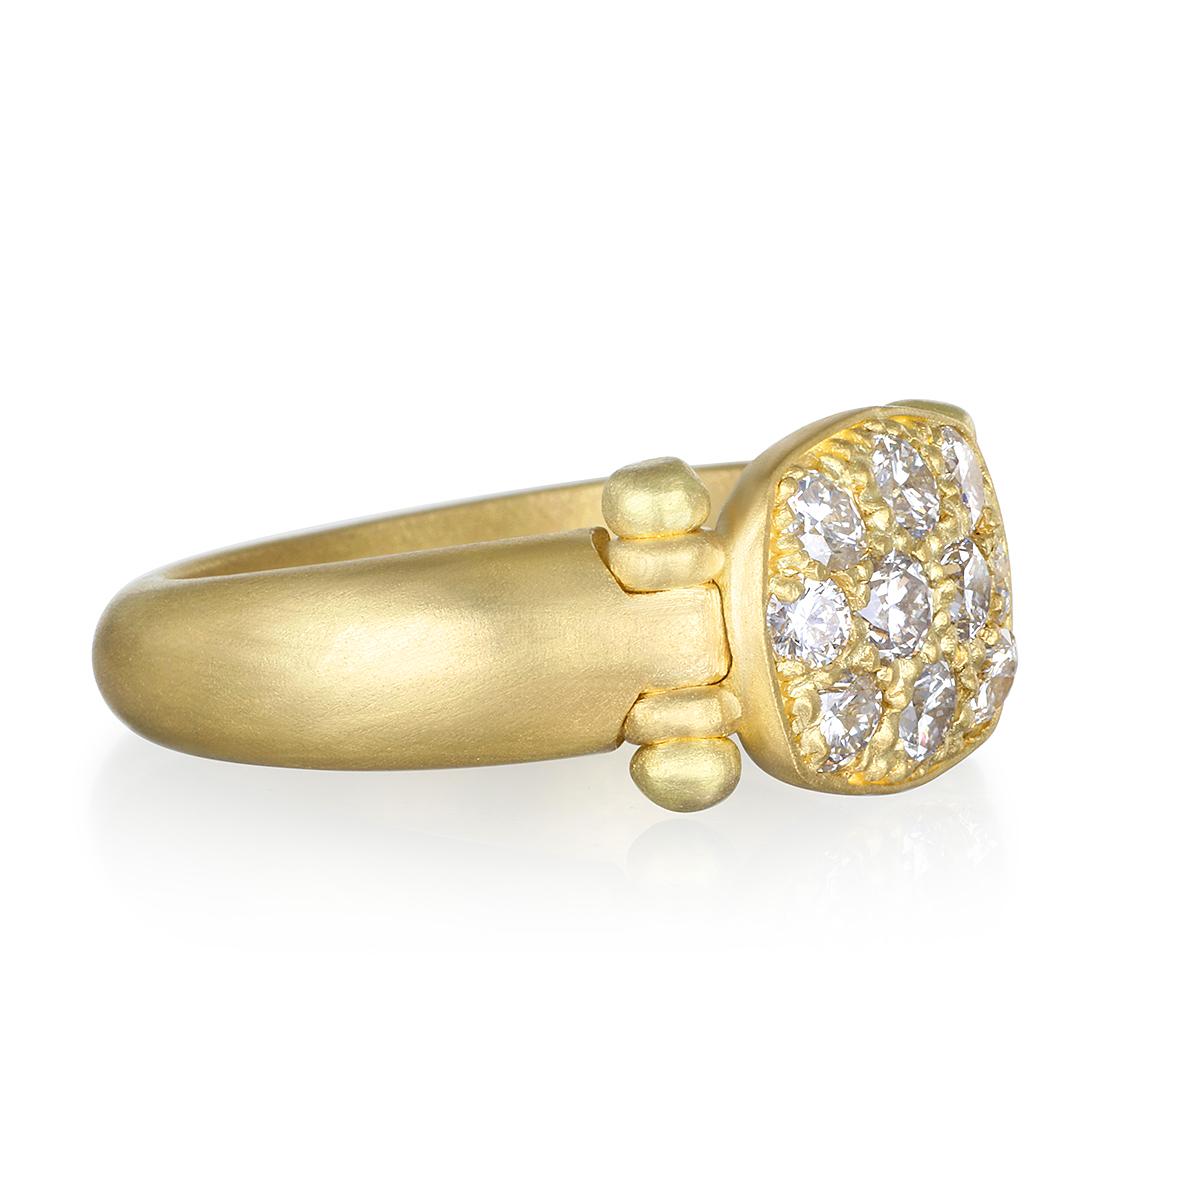 Contemporary Faye Kim 18 Karat Gold Pave Diamond Hinged Chiclet Ring For Sale